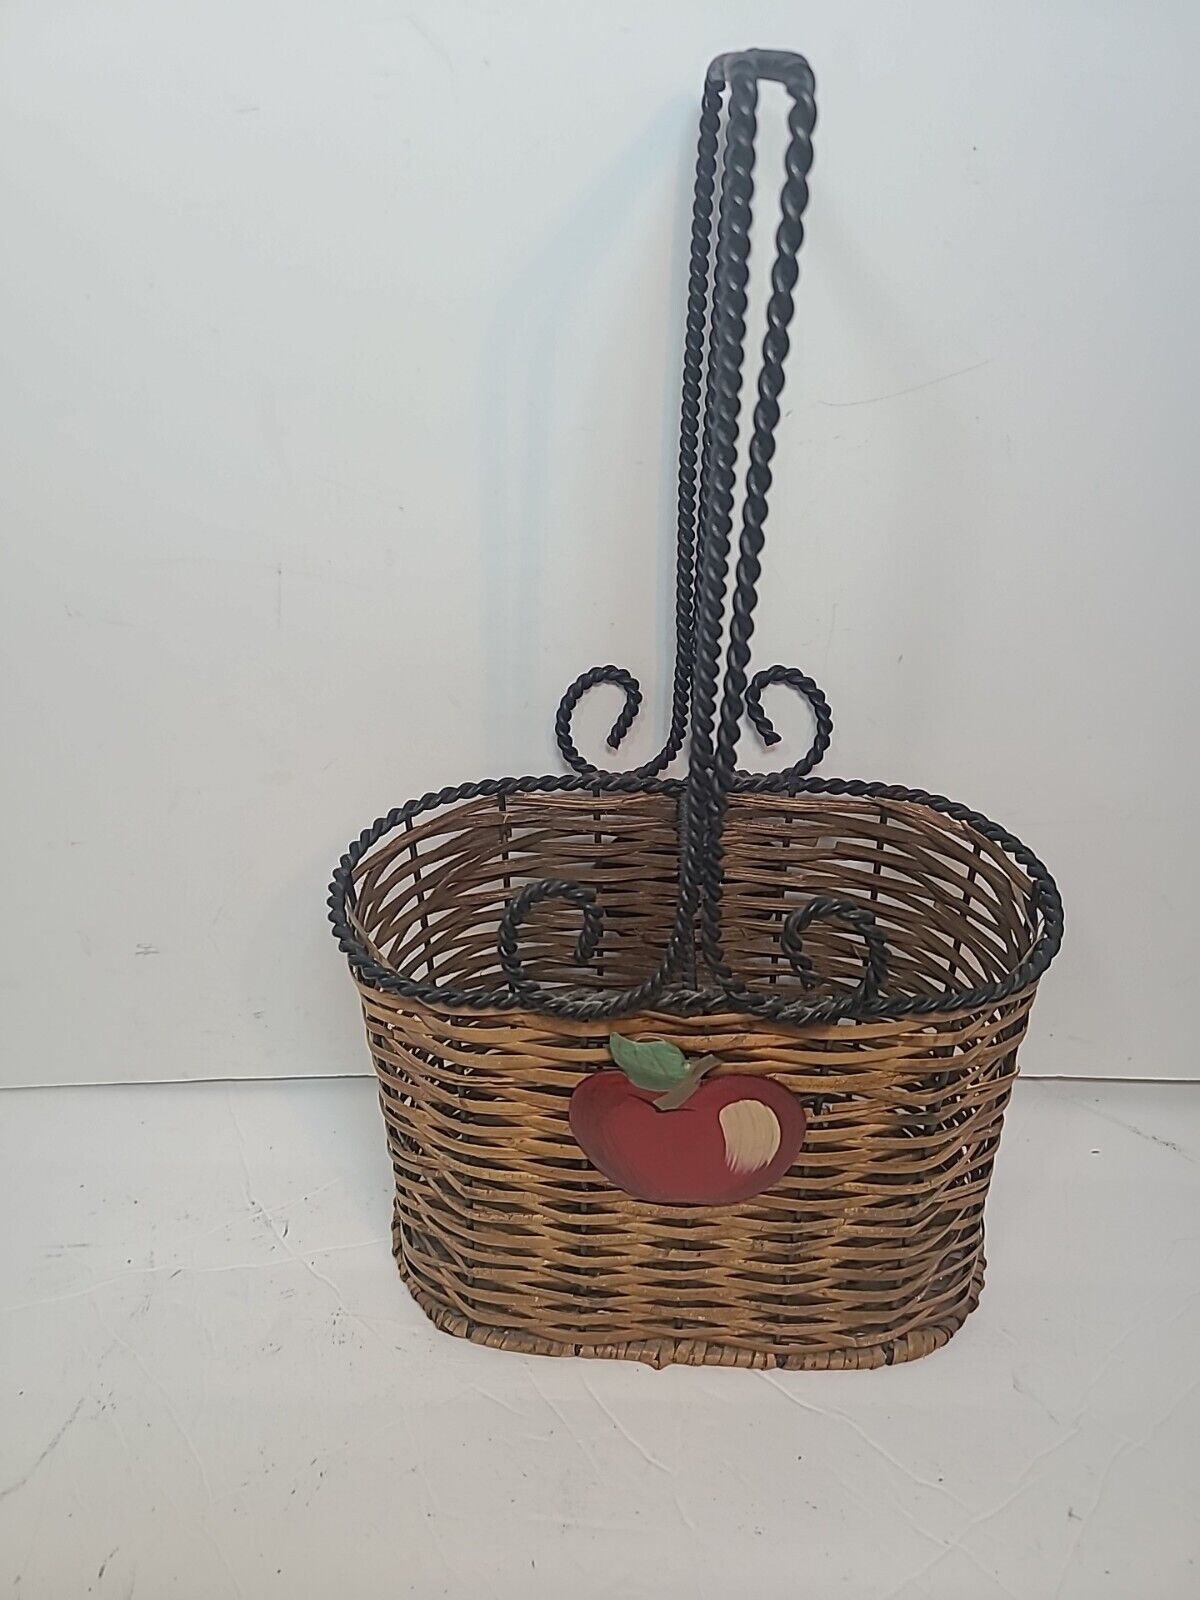 Oval Wicker Basket Featuring an Apple on Front & Back with Black Wire Handles